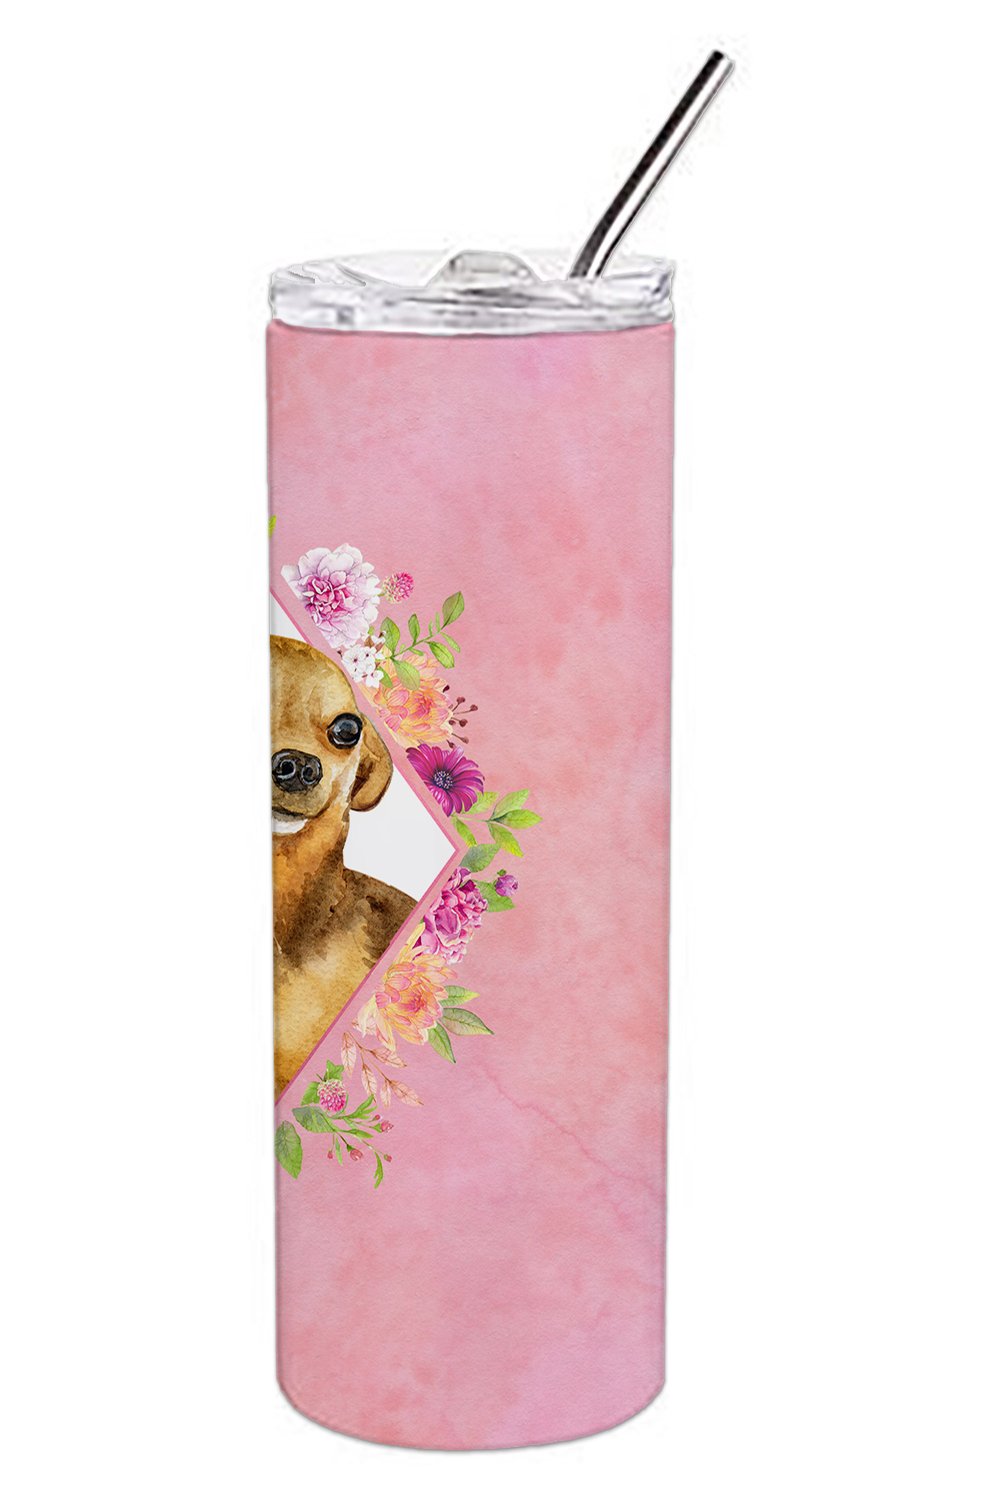 Chihuahua #1 Pink Flowers Double Walled Stainless Steel 20 oz Skinny Tumbler CK4128TBL20 by Caroline's Treasures